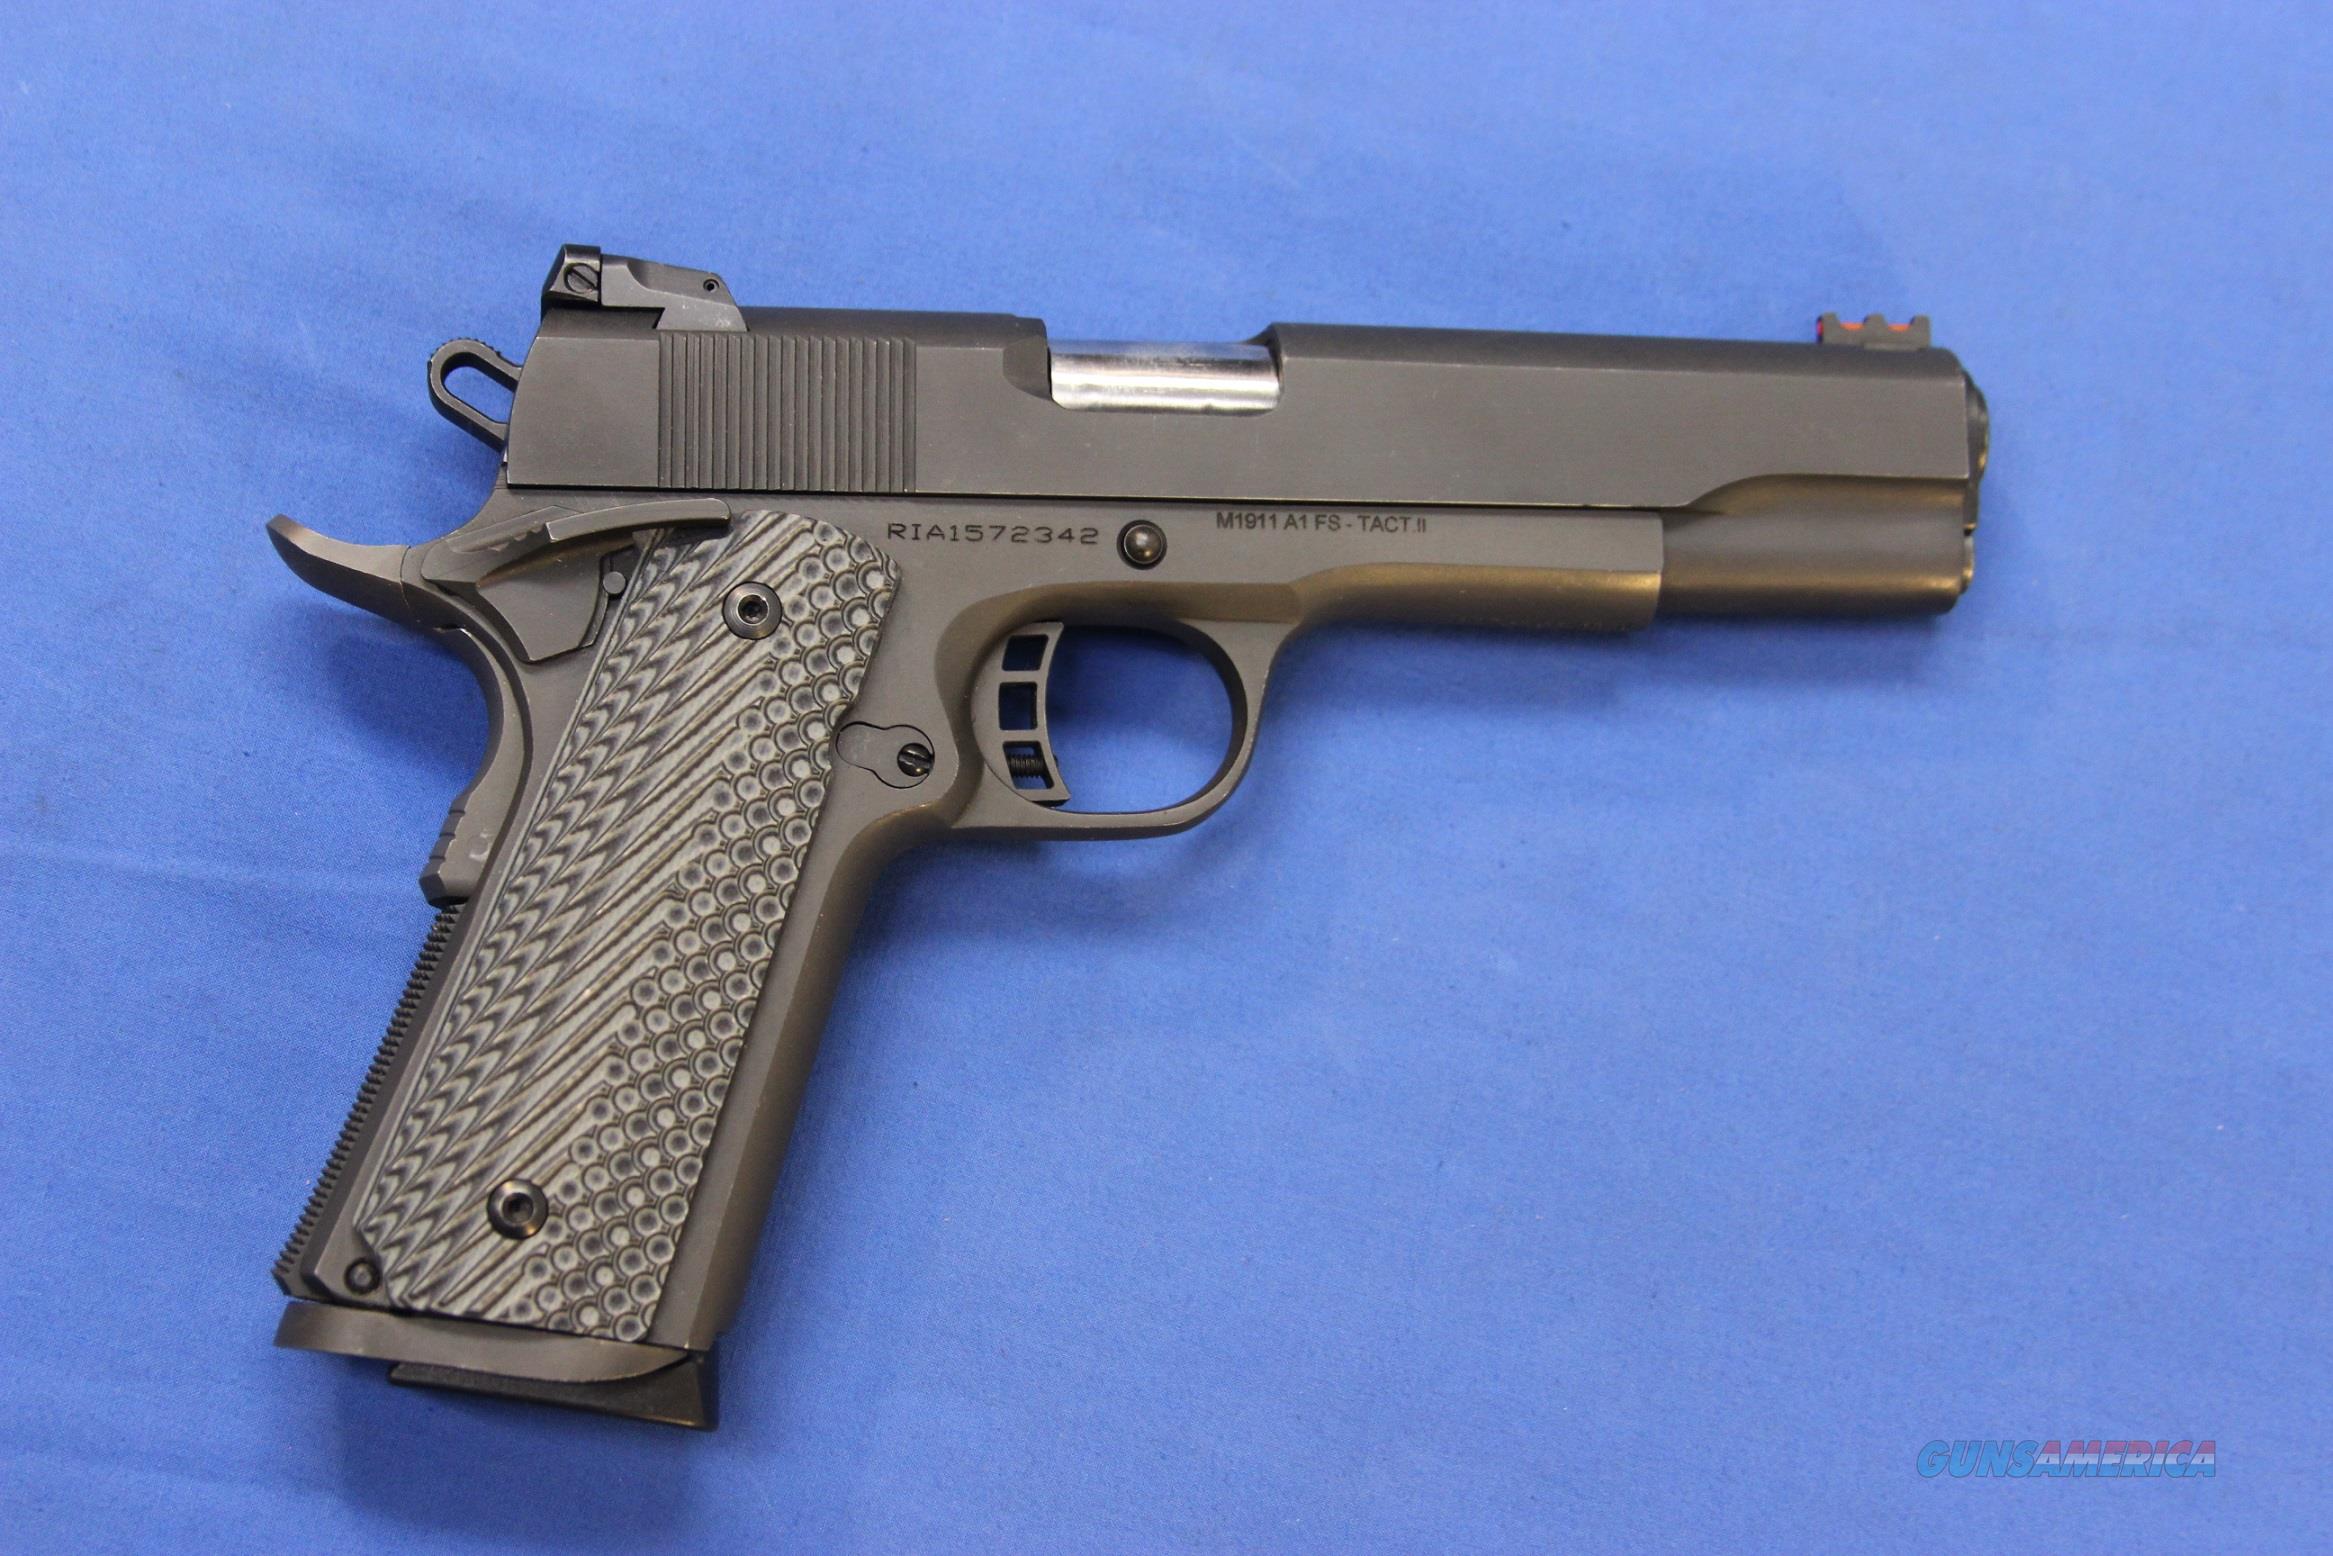 Rock Island Armory 1911 A1 Fs Tacti For Sale At 986535394 7131